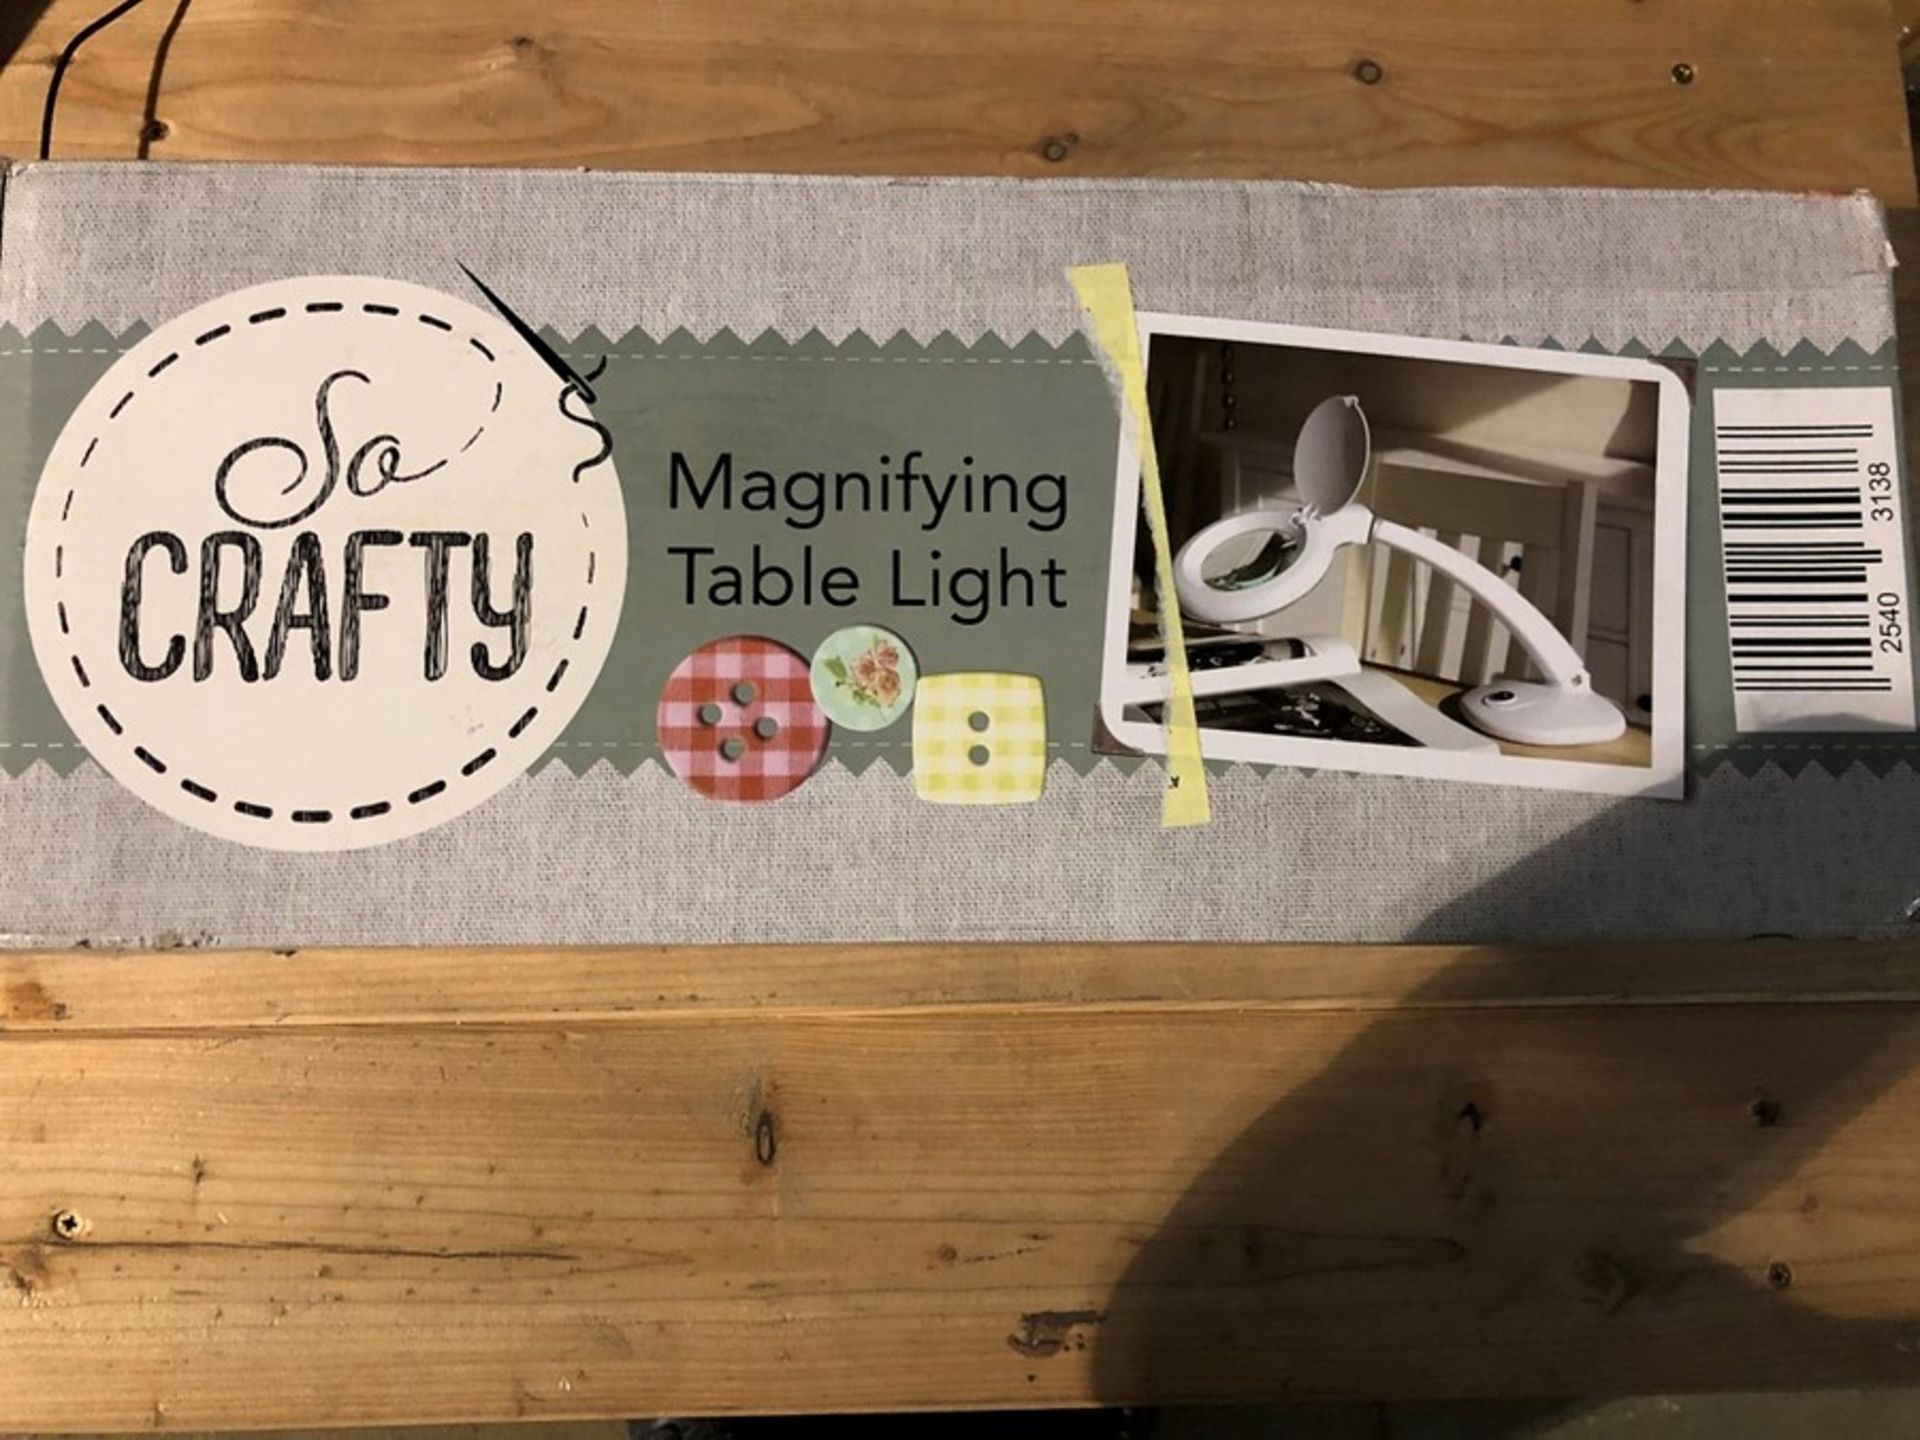 1 BOXED SO CRAFTY MAGNIFYING TABLE LIGHT IN WHITE / RRP £37.76 (PUBLIC VIEWING AVAILABLE)